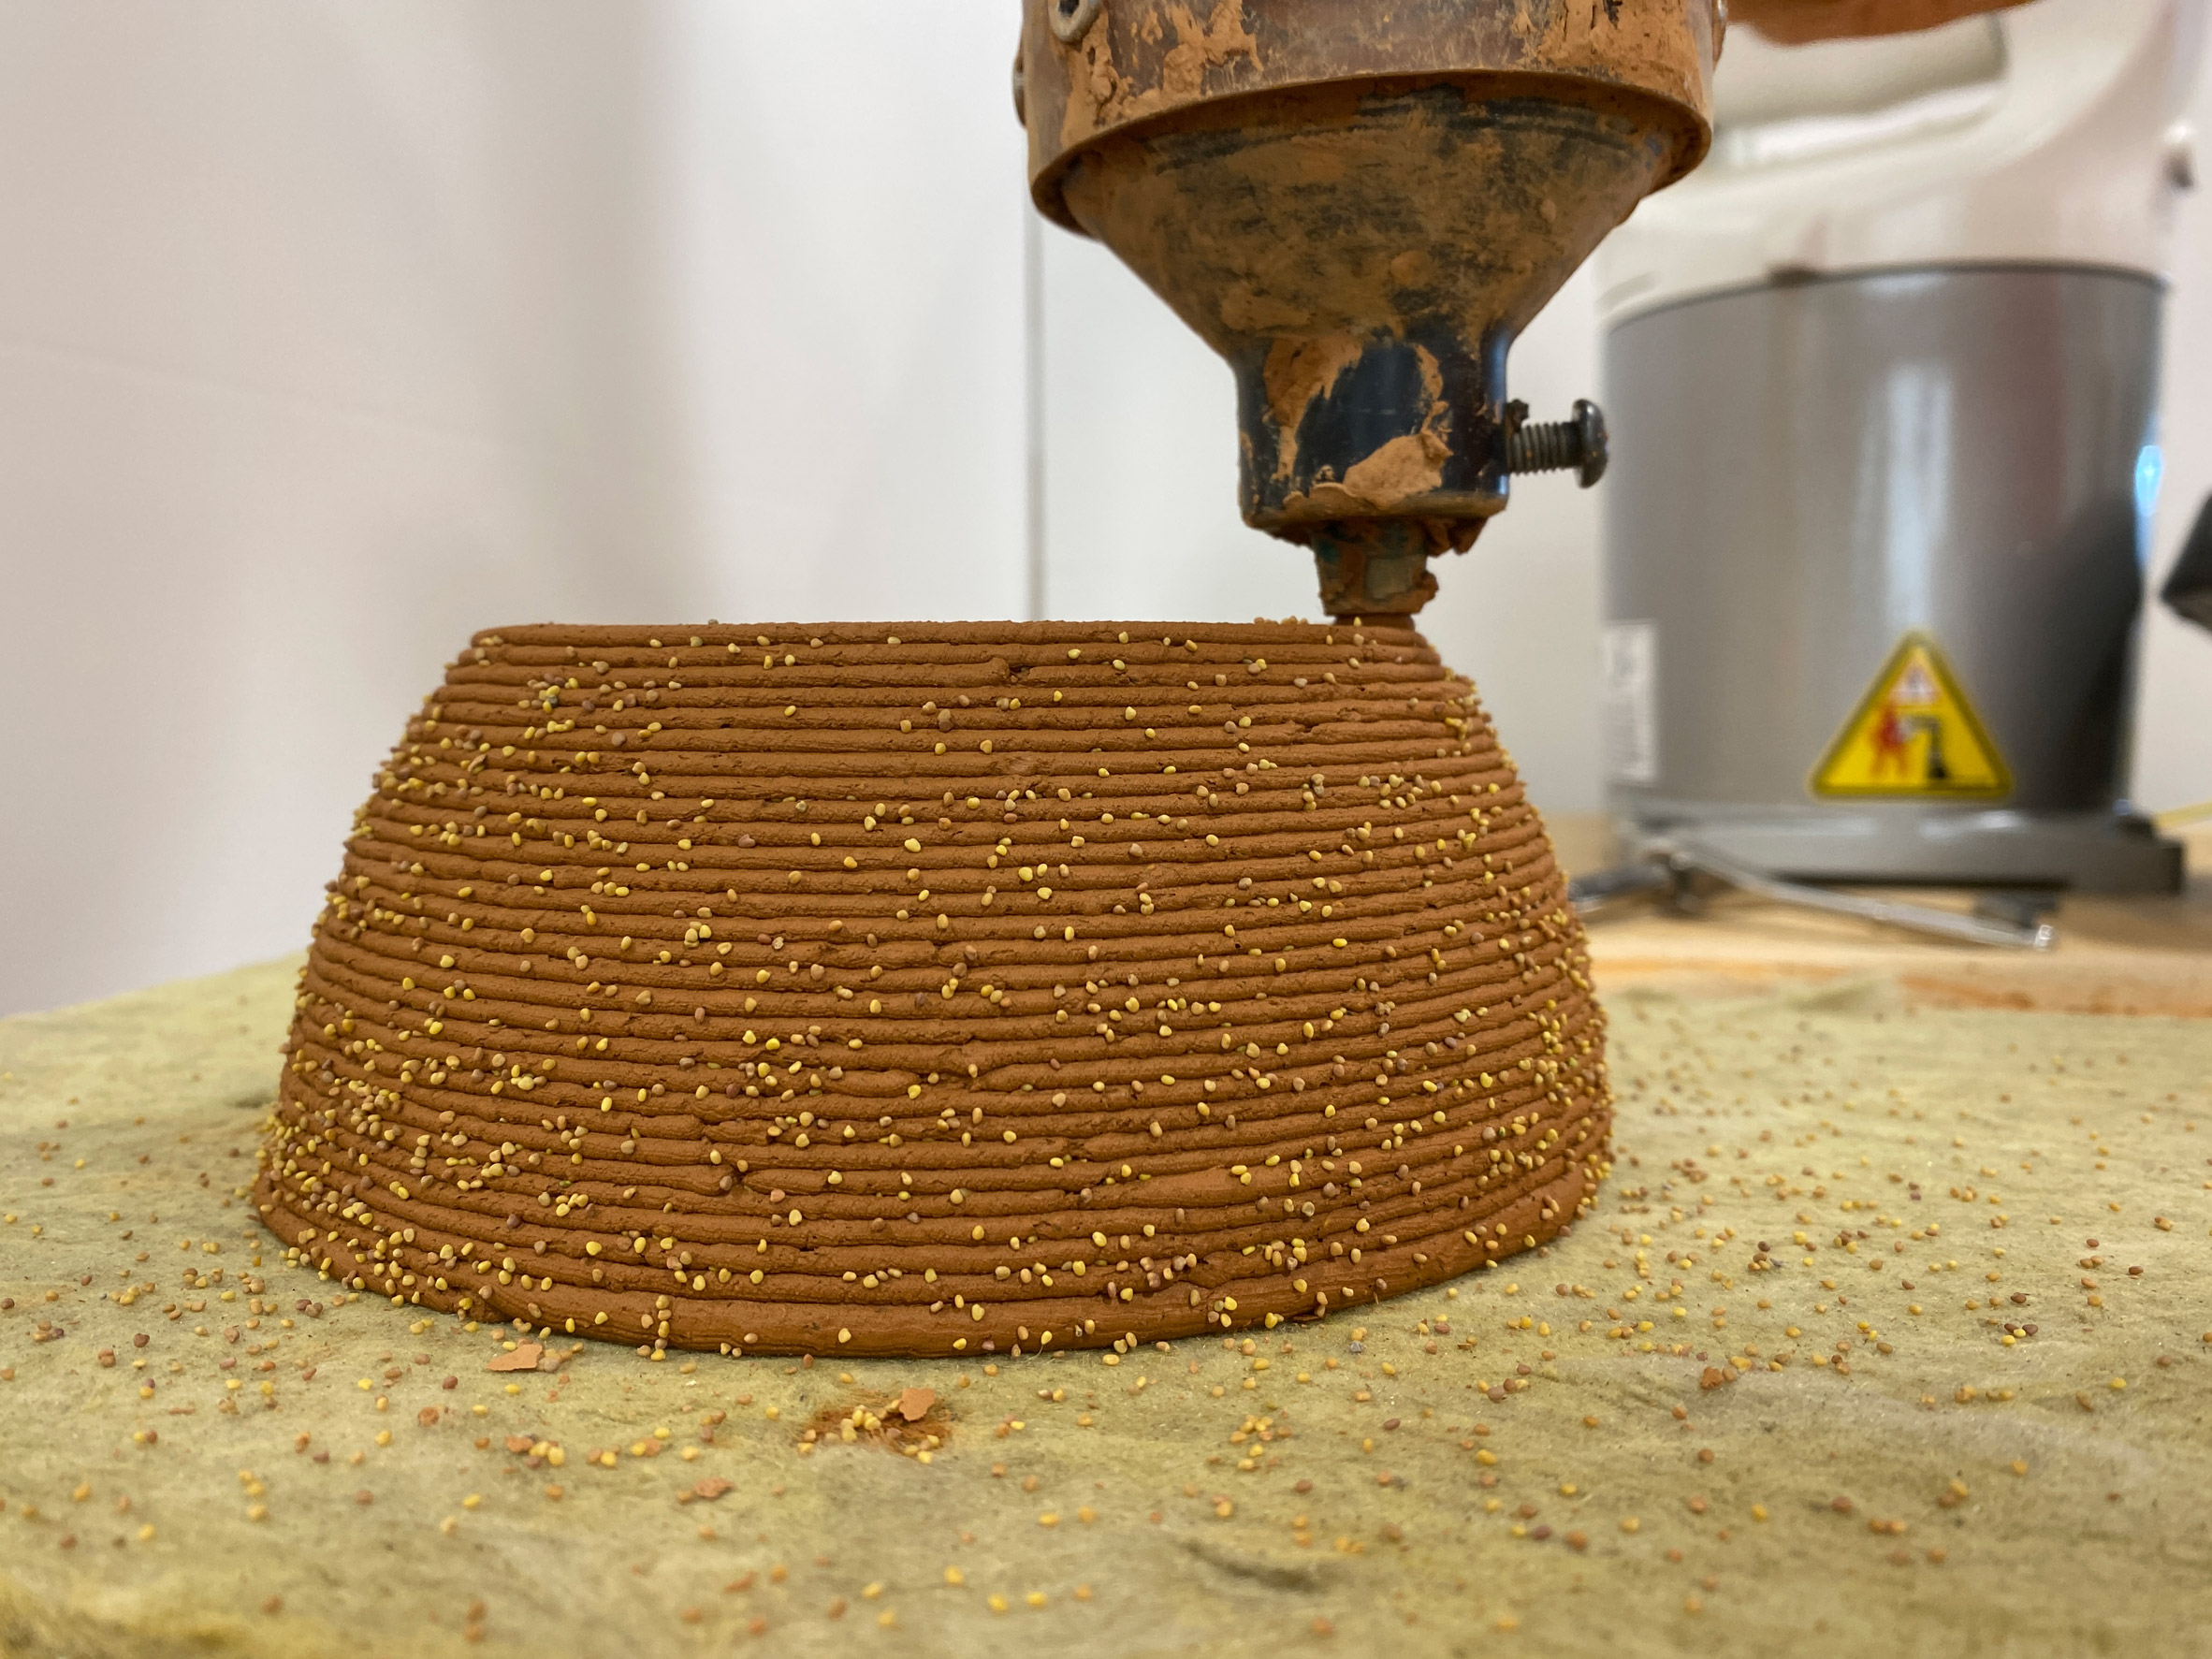 3D printer at University of Virginia printing a domed soil structure